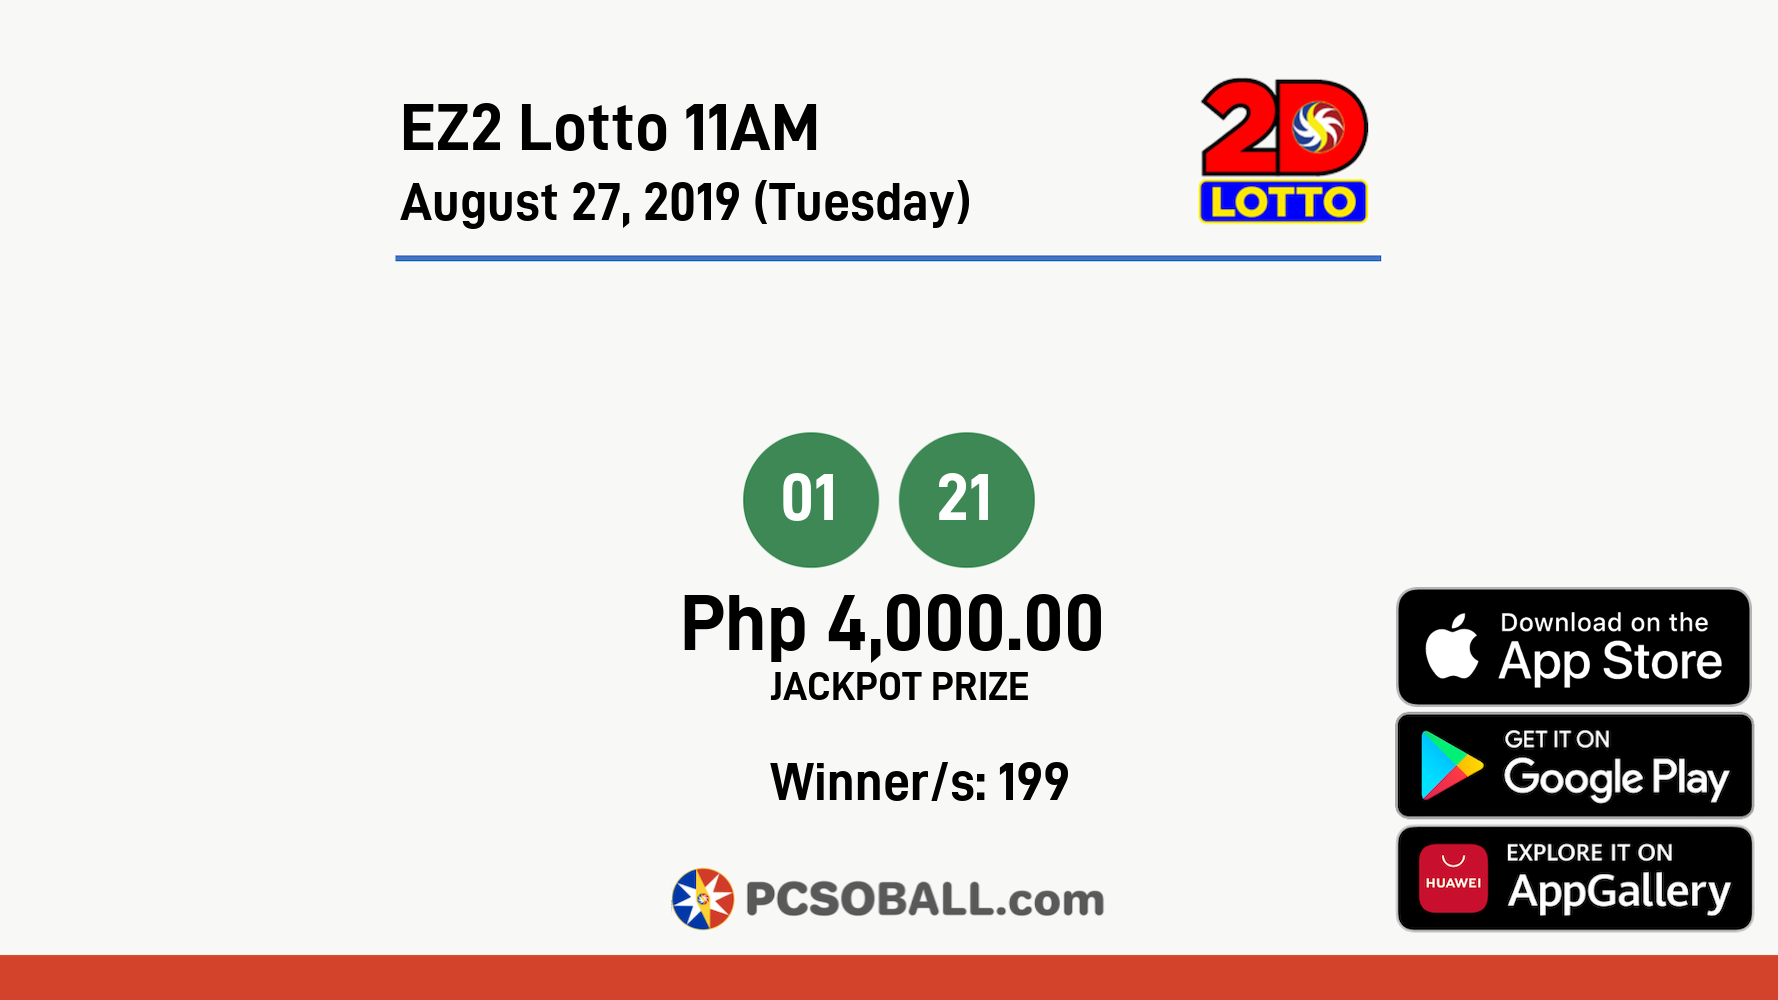 EZ2 Lotto 11AM August 27, 2019 (Tuesday) Result